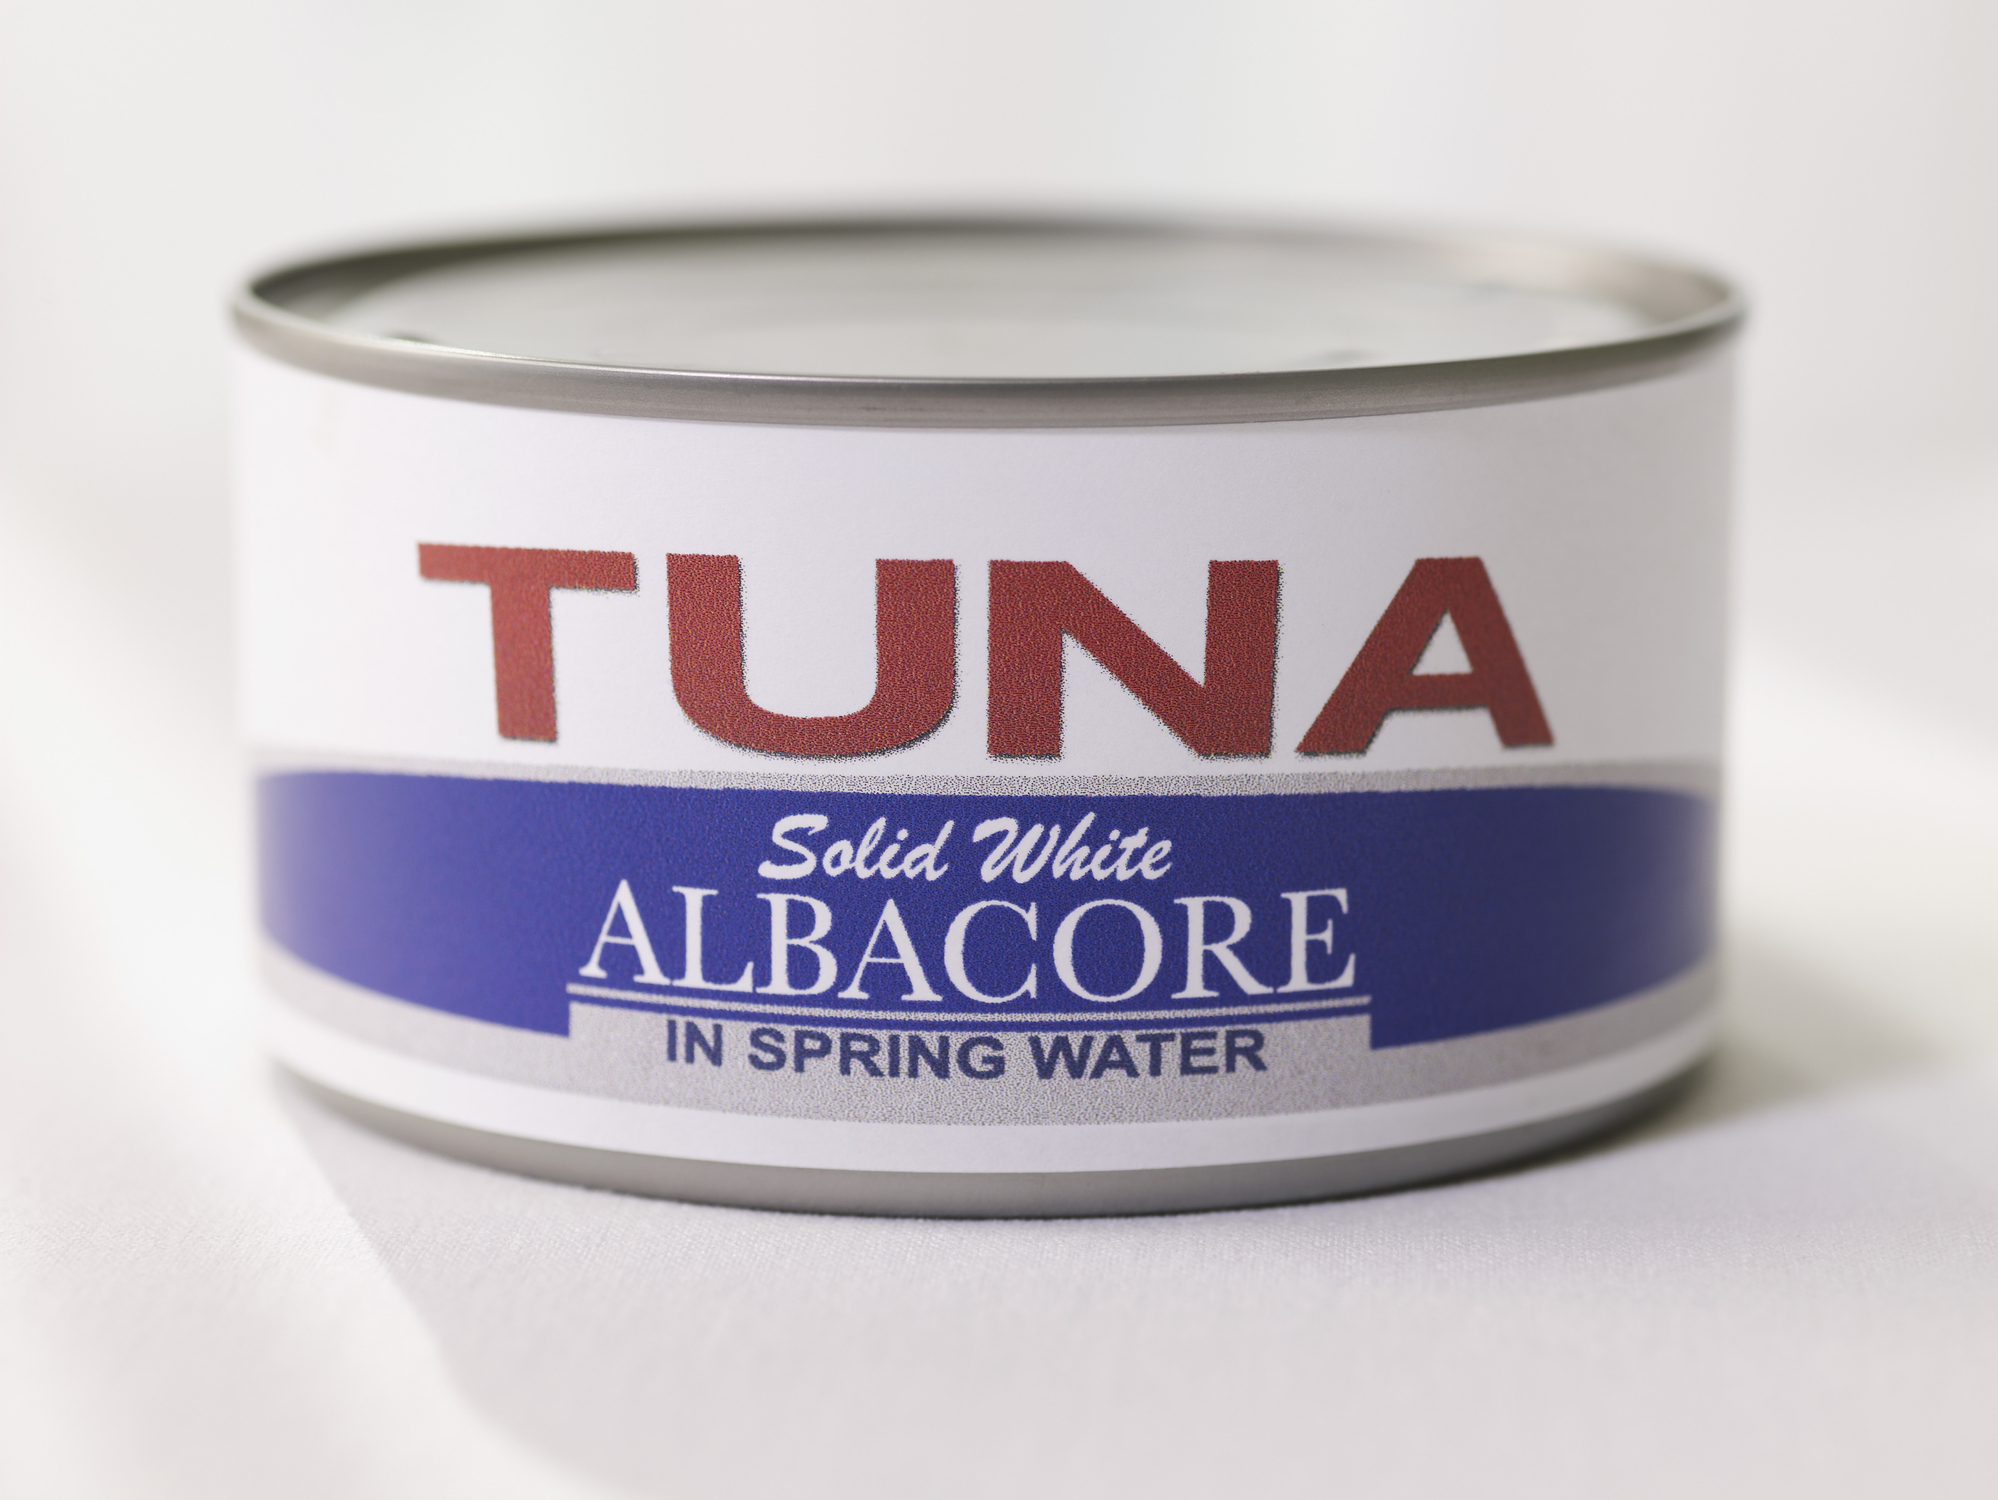 Woman orders a $275 ashtray, receives a can of tuna instead